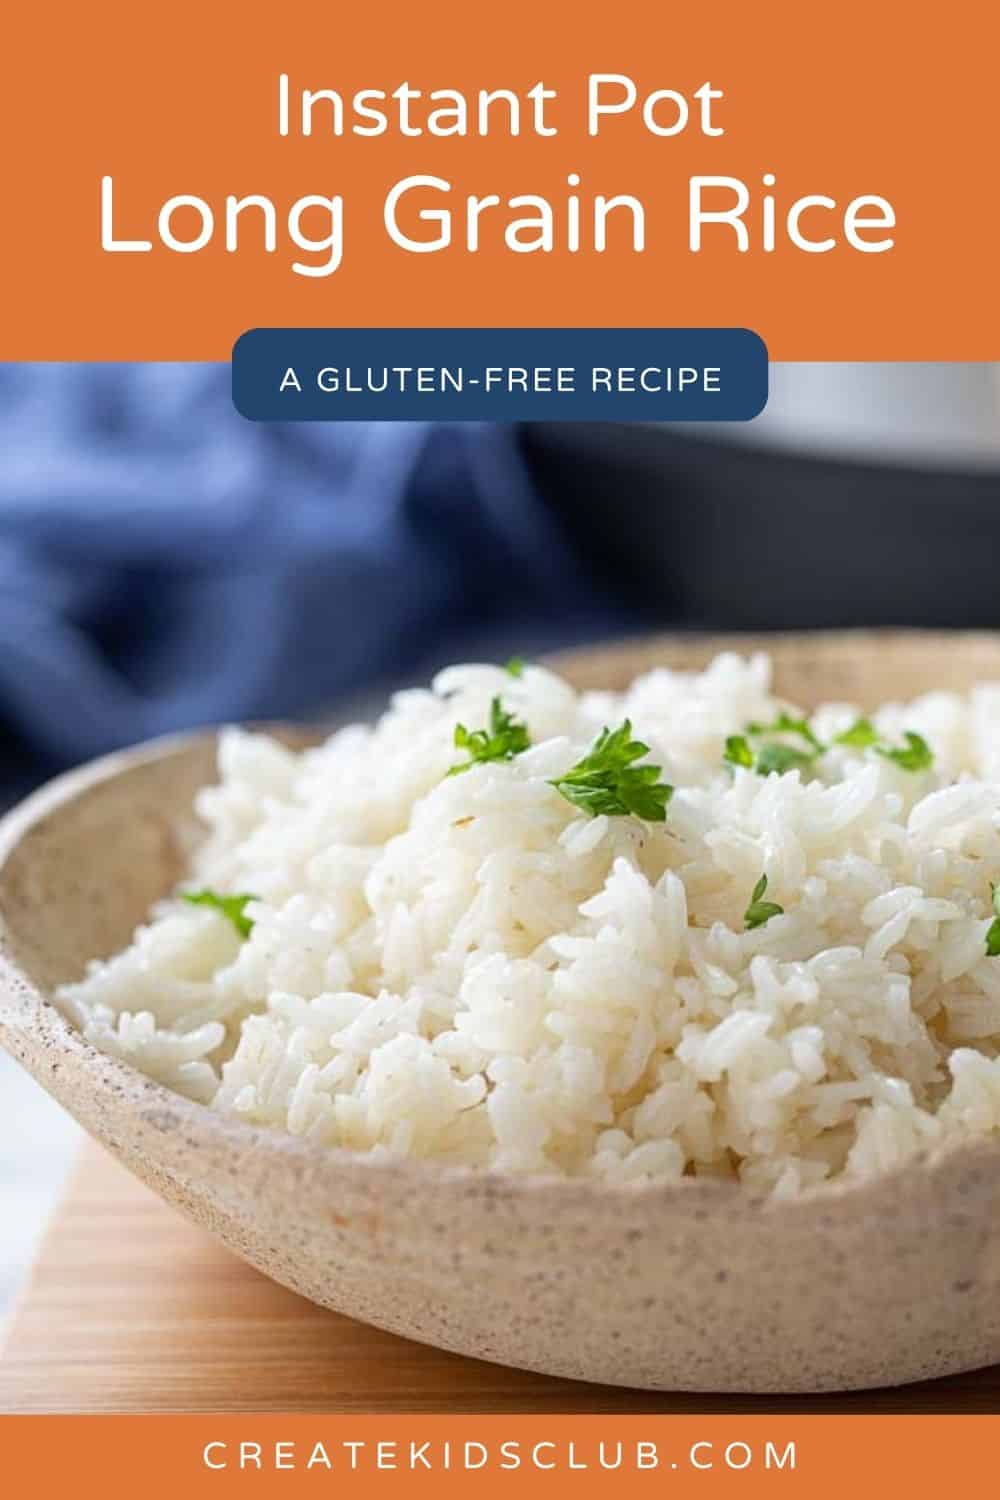 Pin of instant pot long grain rice in a bowl